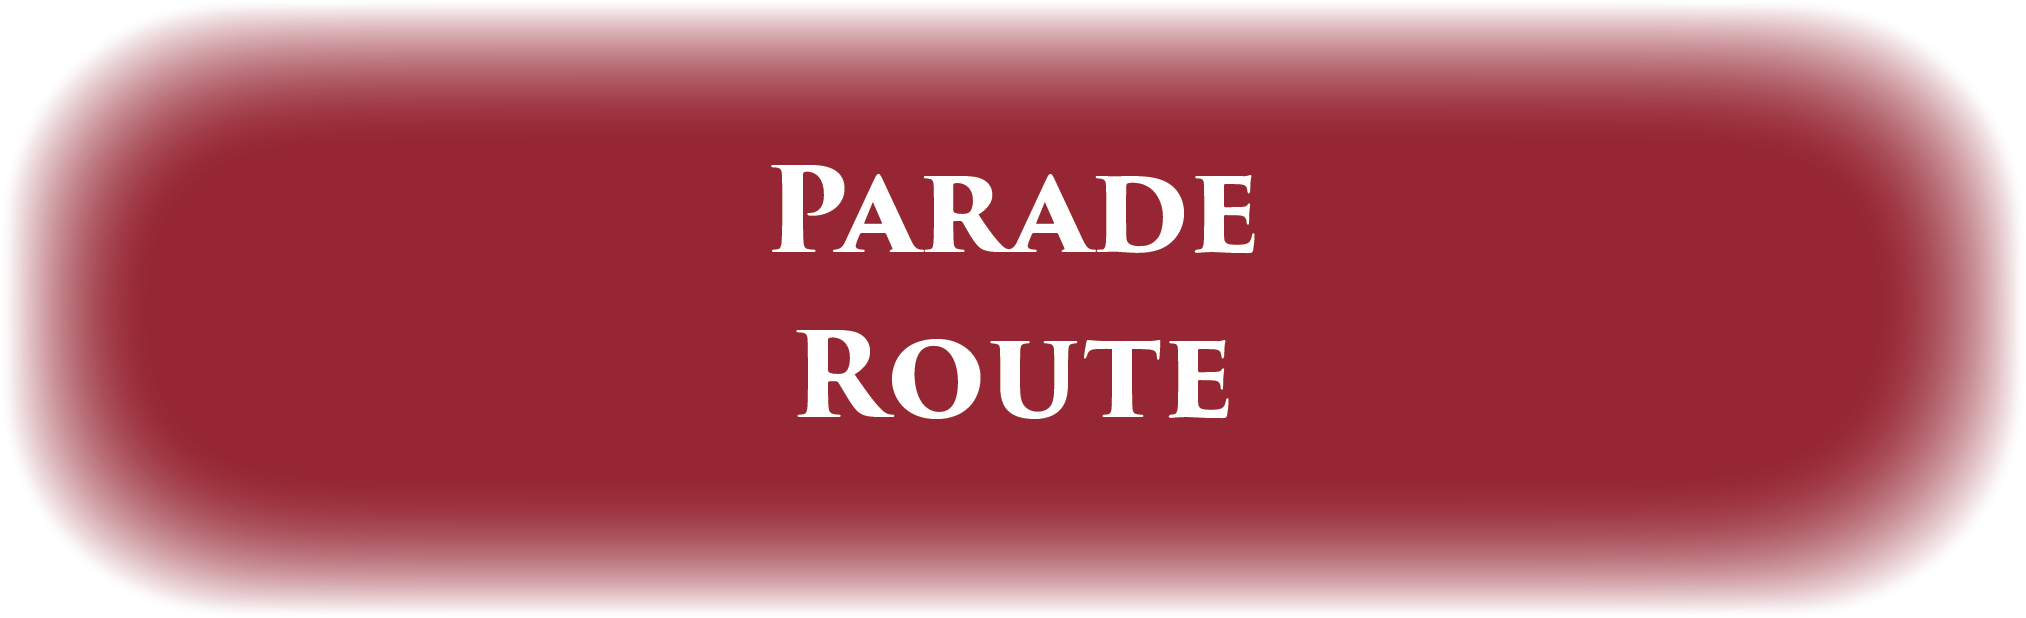 See the Parade Route